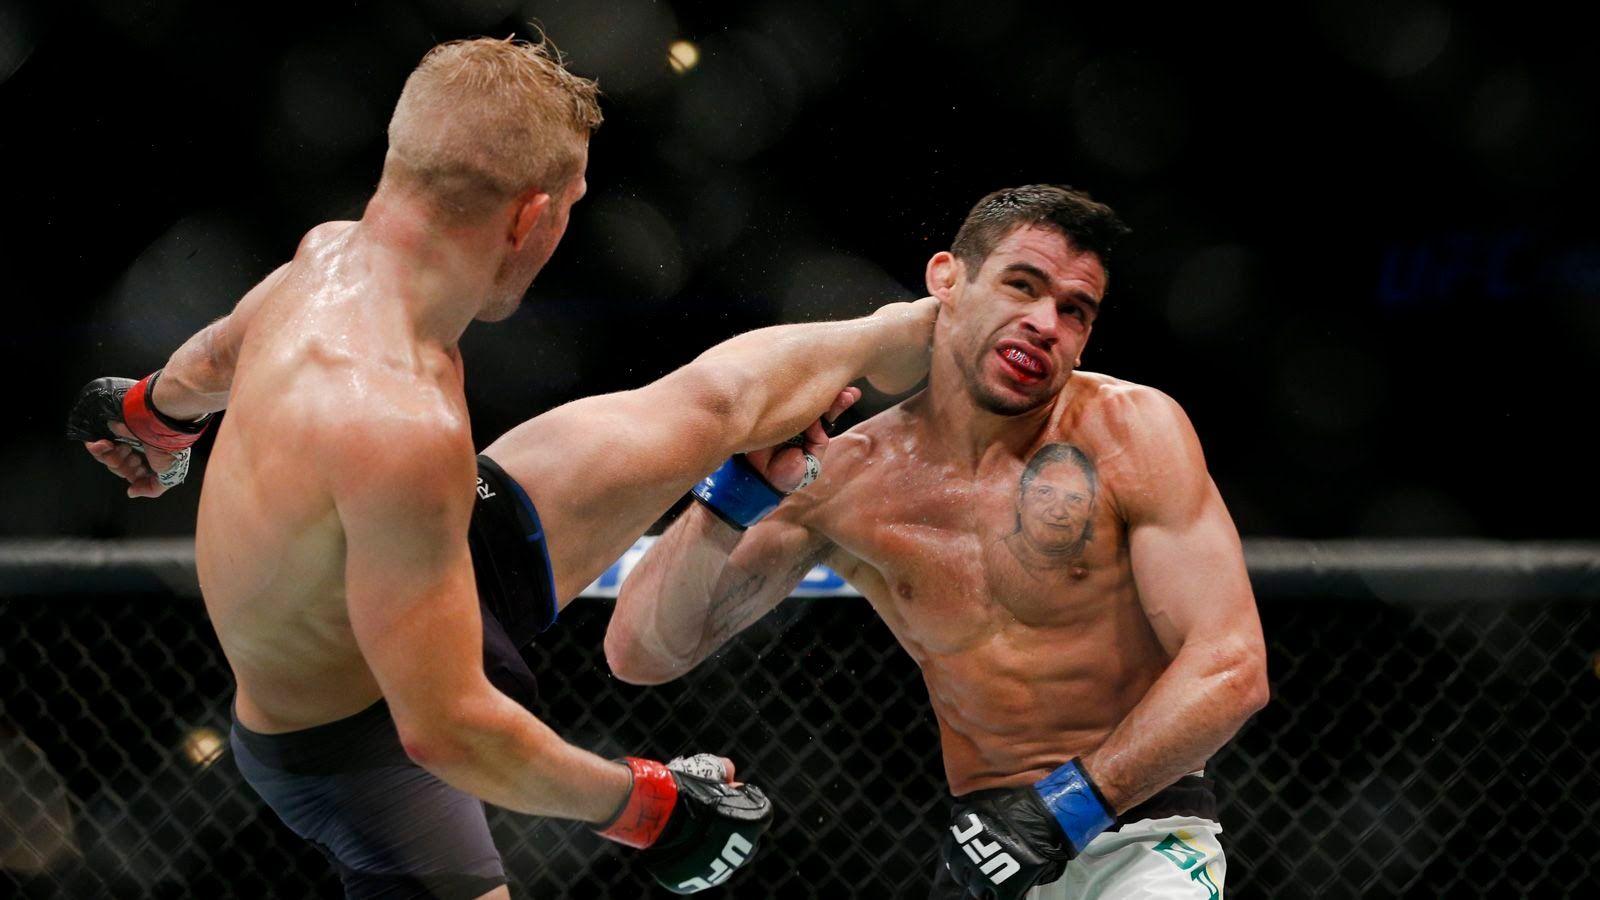 biggest bet placed for barao vs dillashaw